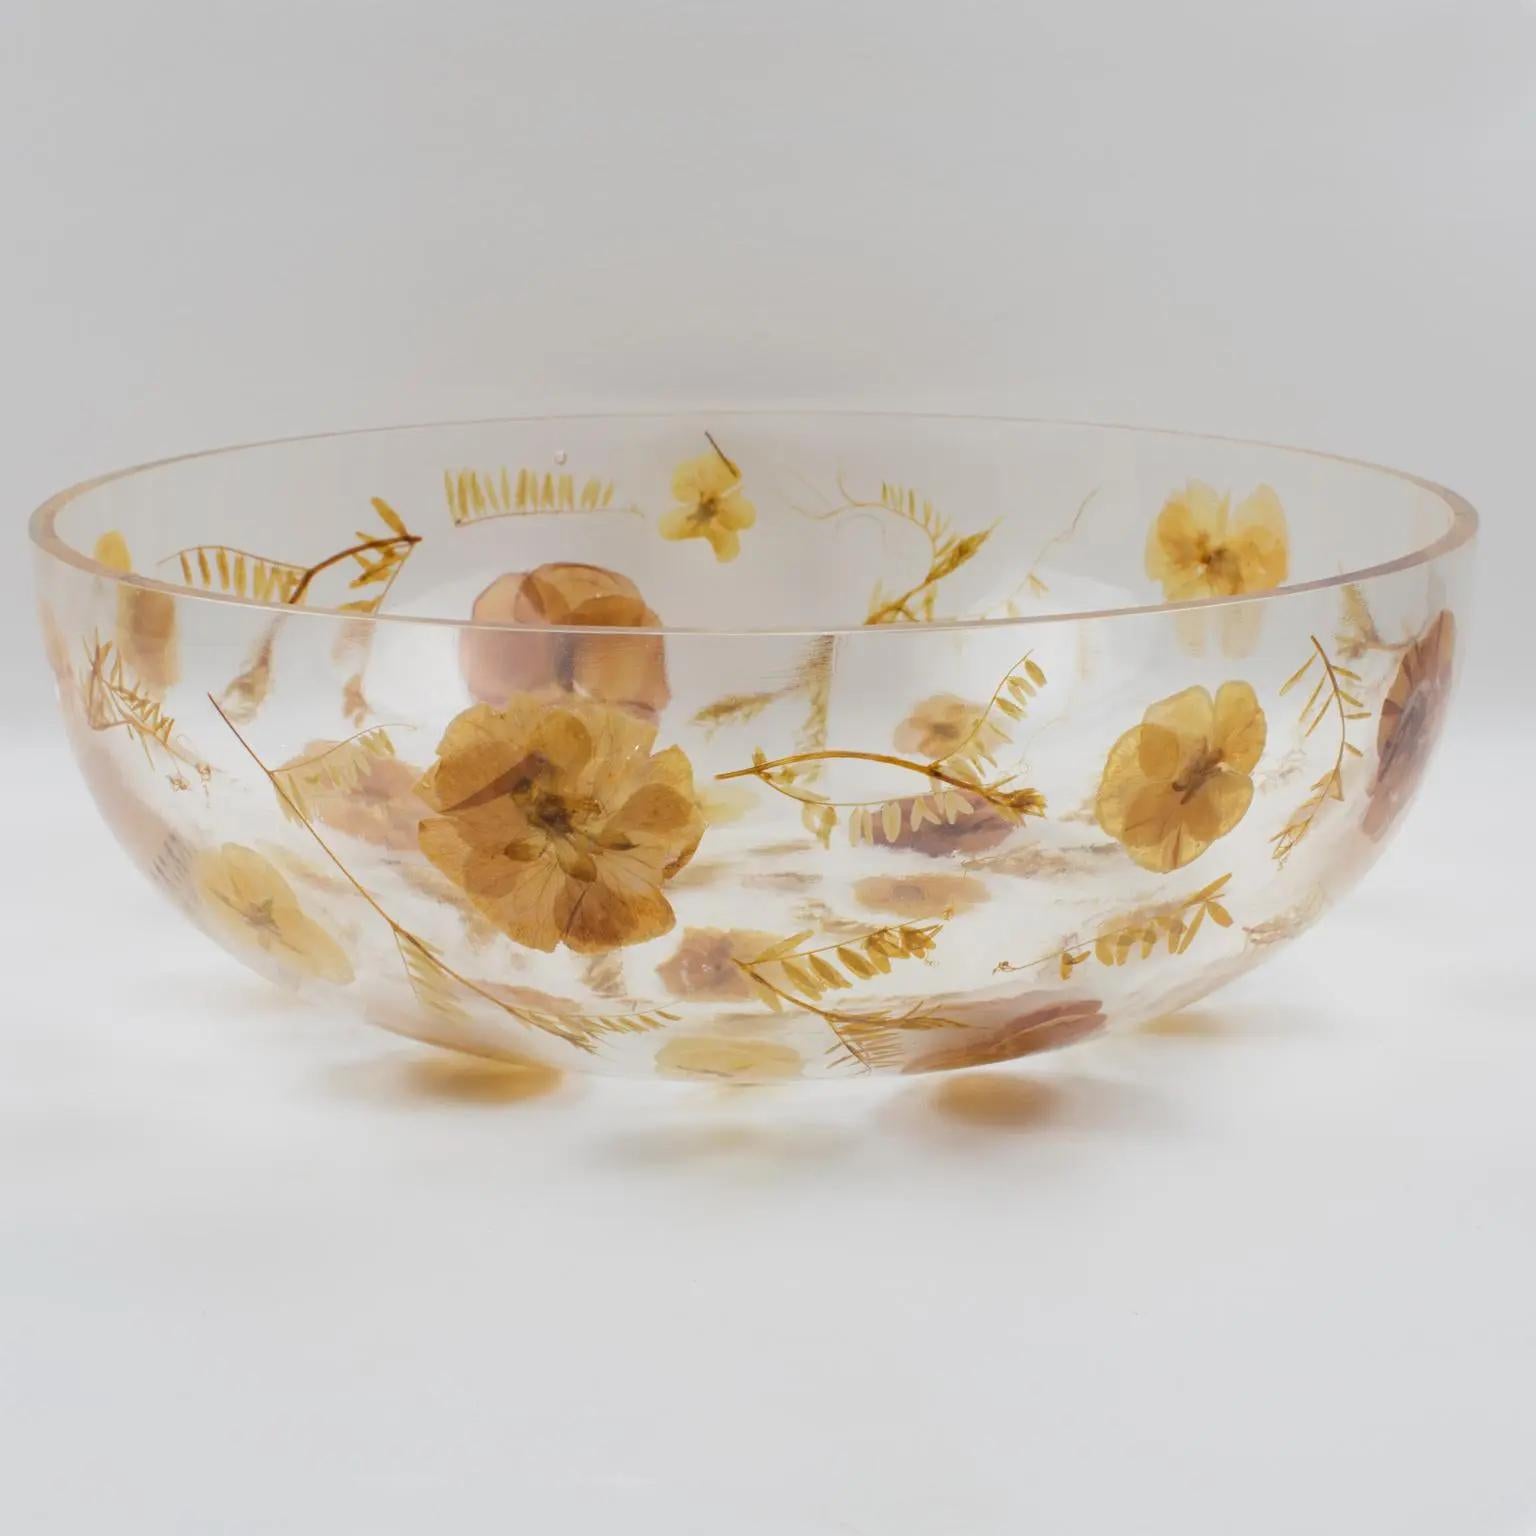 Resinplast, Italy, manufactured this stunning resin decorative bowl, centerpiece, or serving dish in the 1970s. The extra thick clear resin or acrylic deep rounded oversized bowl shape has assorted genuine autumn leaves and dried flowers embedded in